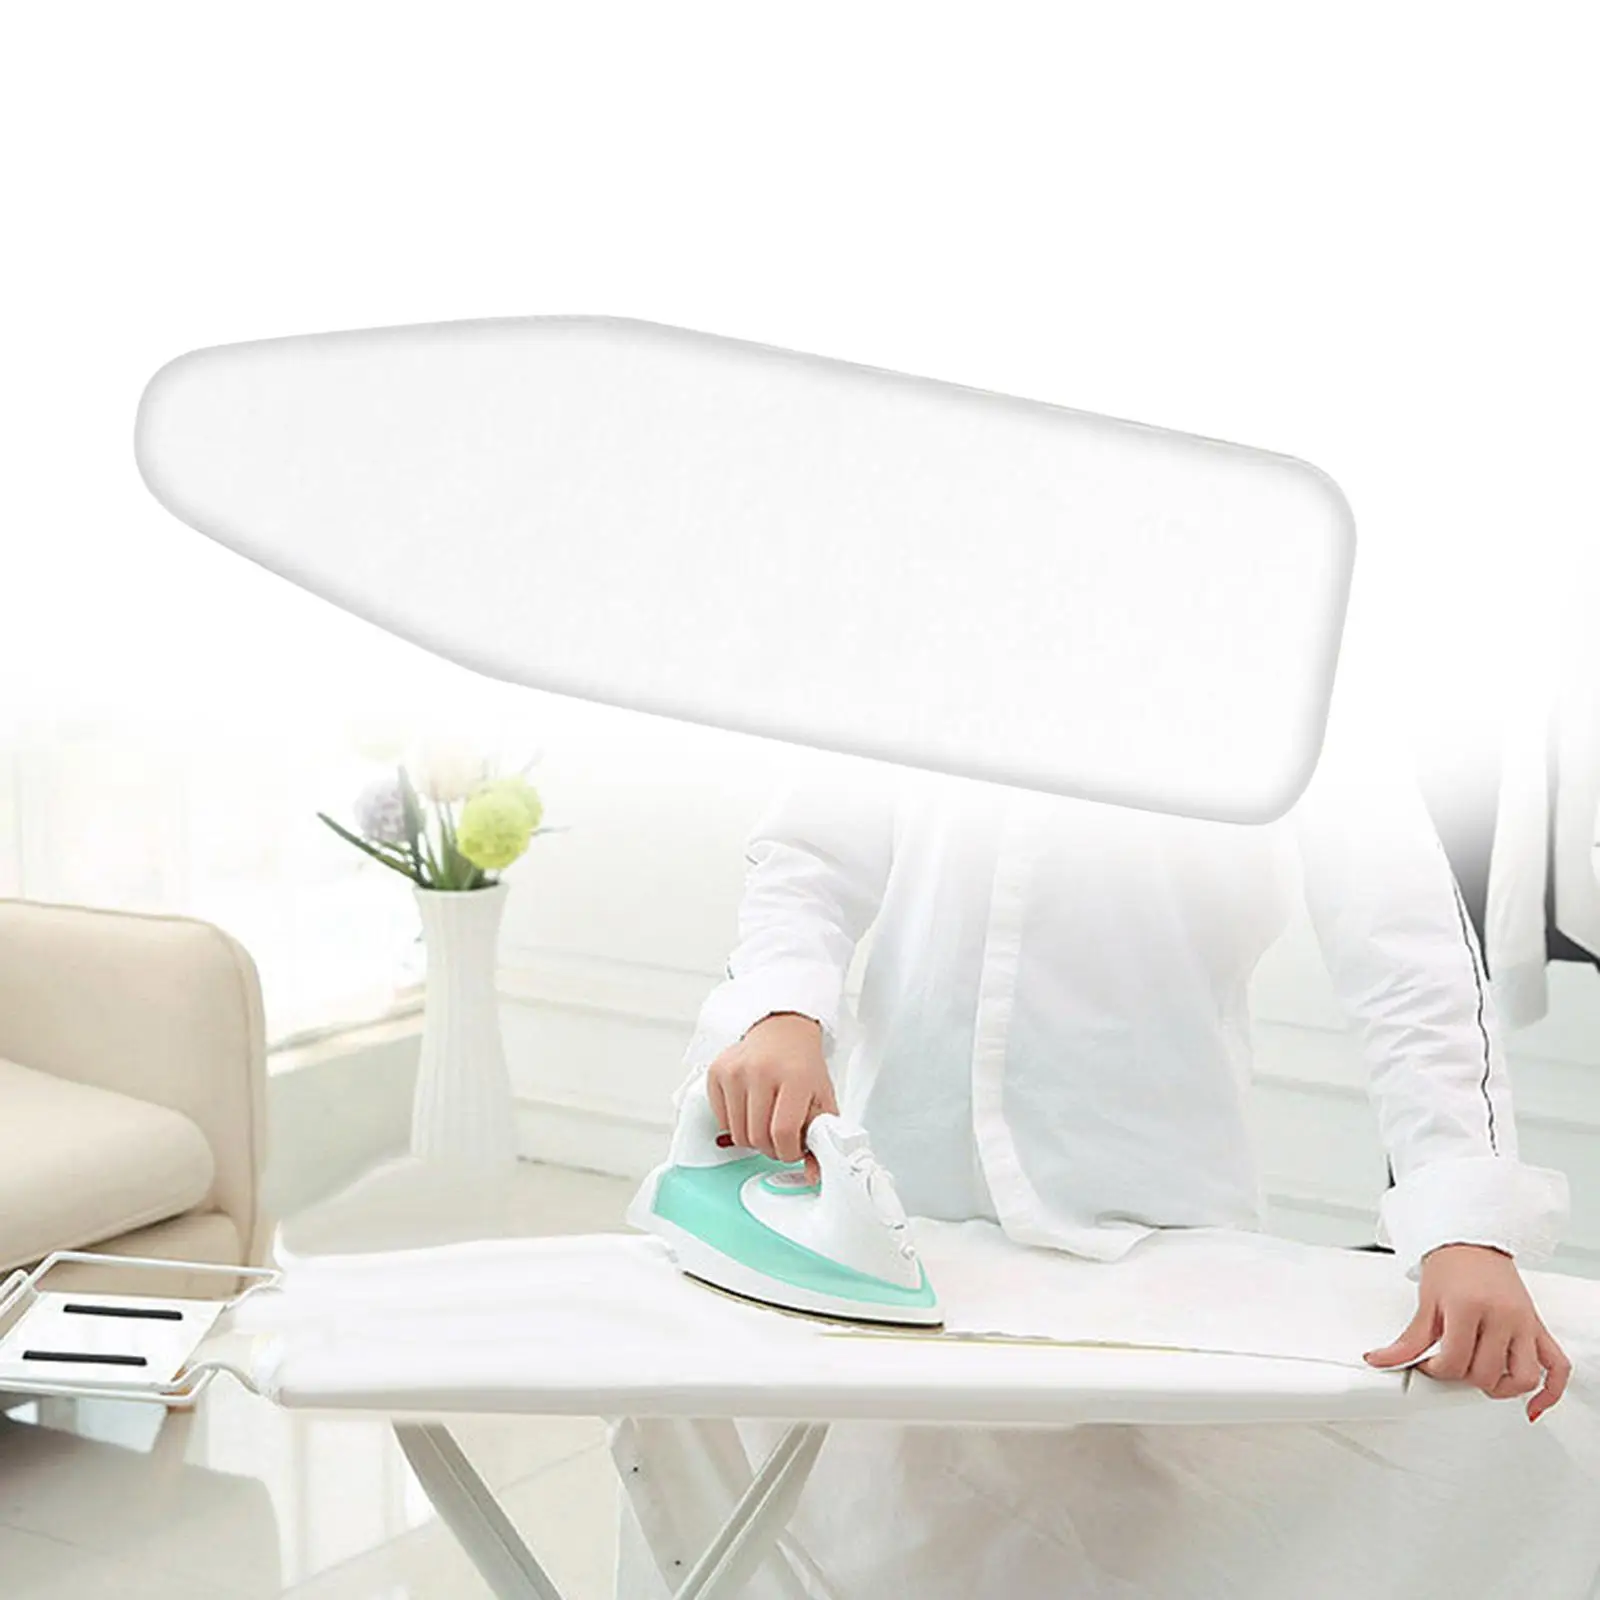 Ironing Board Padding for Iron Board Heat Resistant Spare Parts Portable Space Saving Laundry Room Breathable Inset Pad